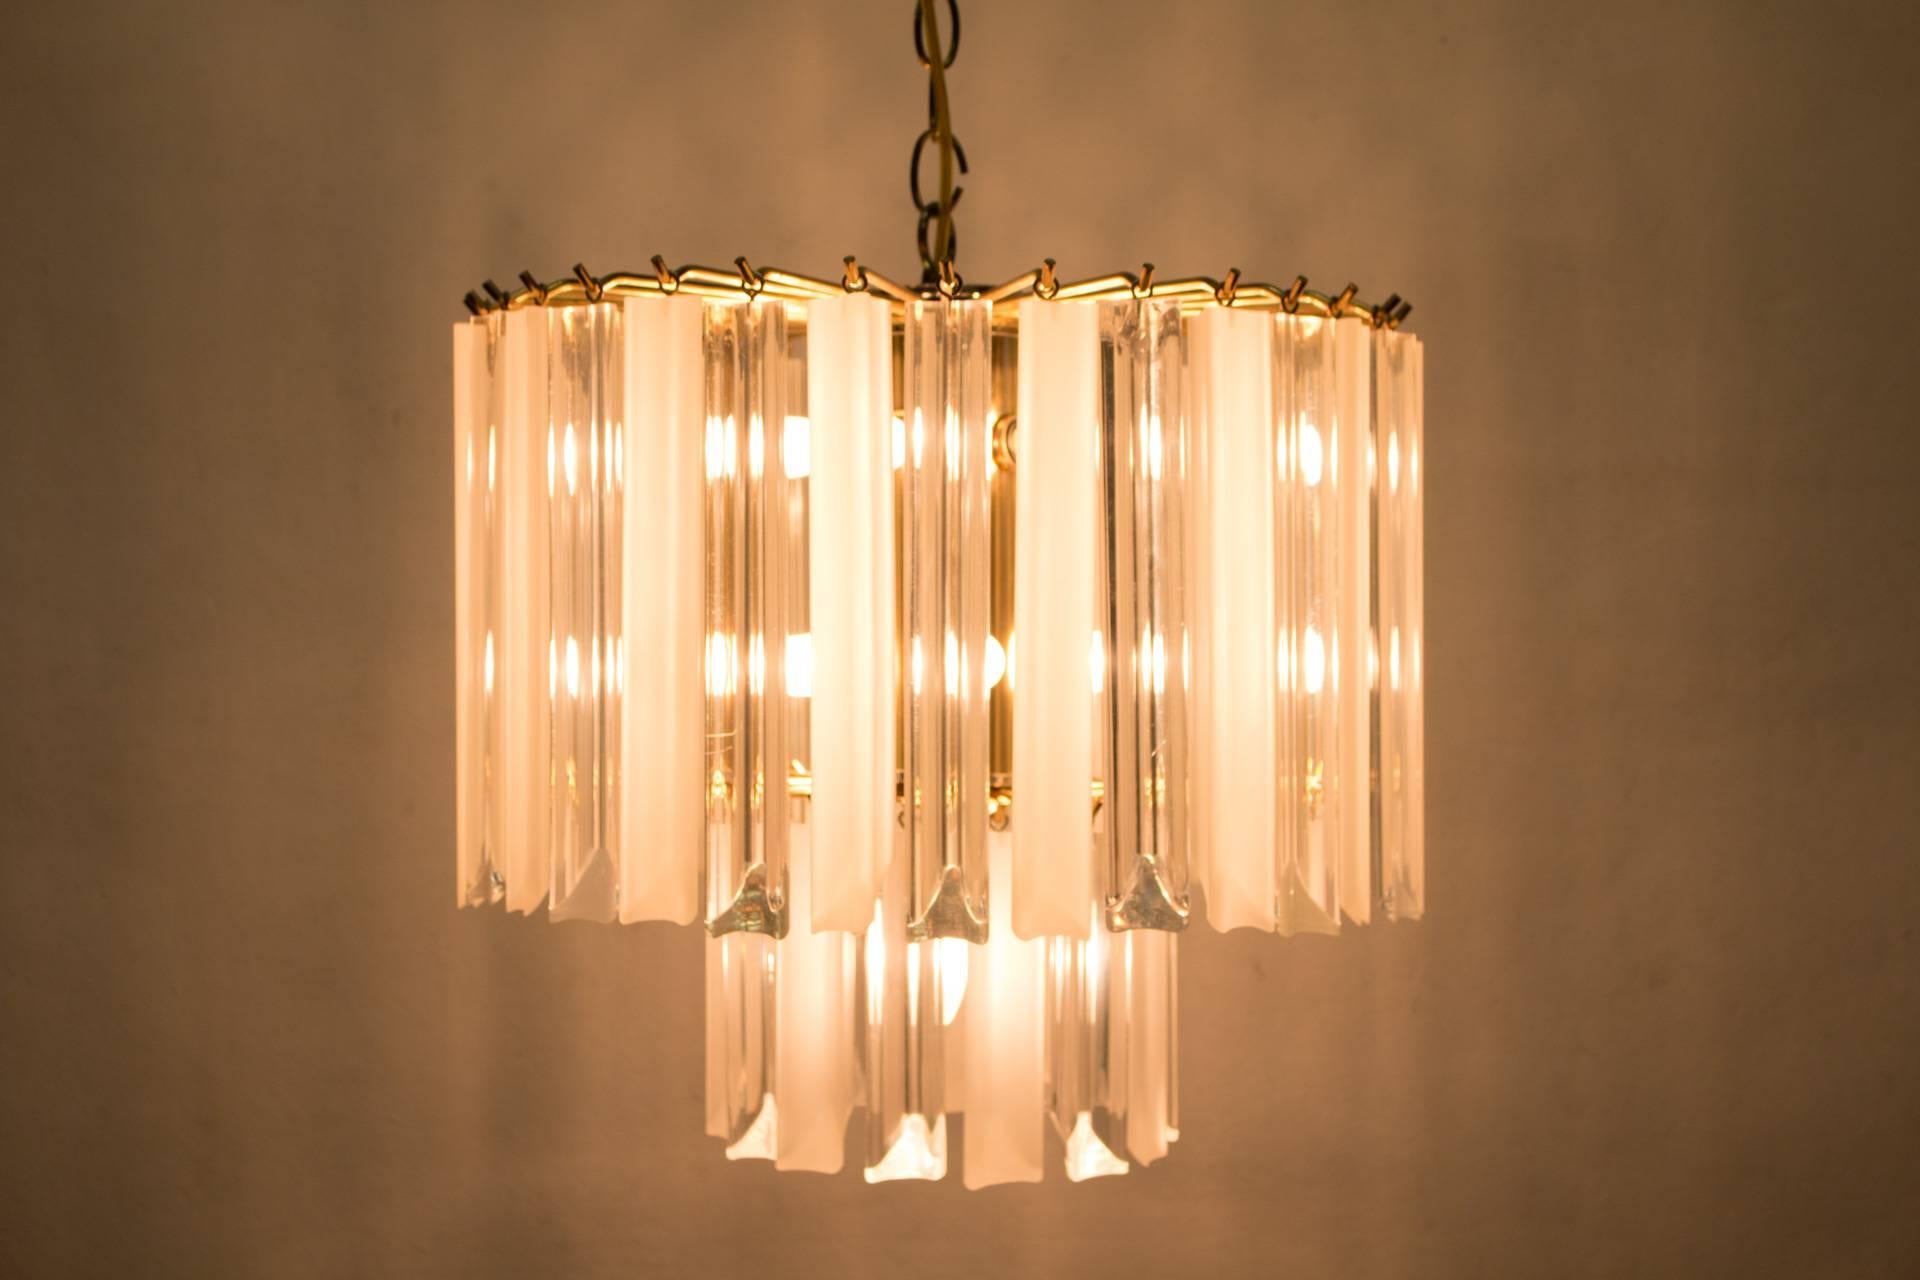 This Lucite chandelier has two levels of alternating opaque and transparent dangles of long, rectangular Lucite prisms. The outermost plane's dangles are ten inches long and the inner plane houses six-inch dangles. The minimal frame and canopy are